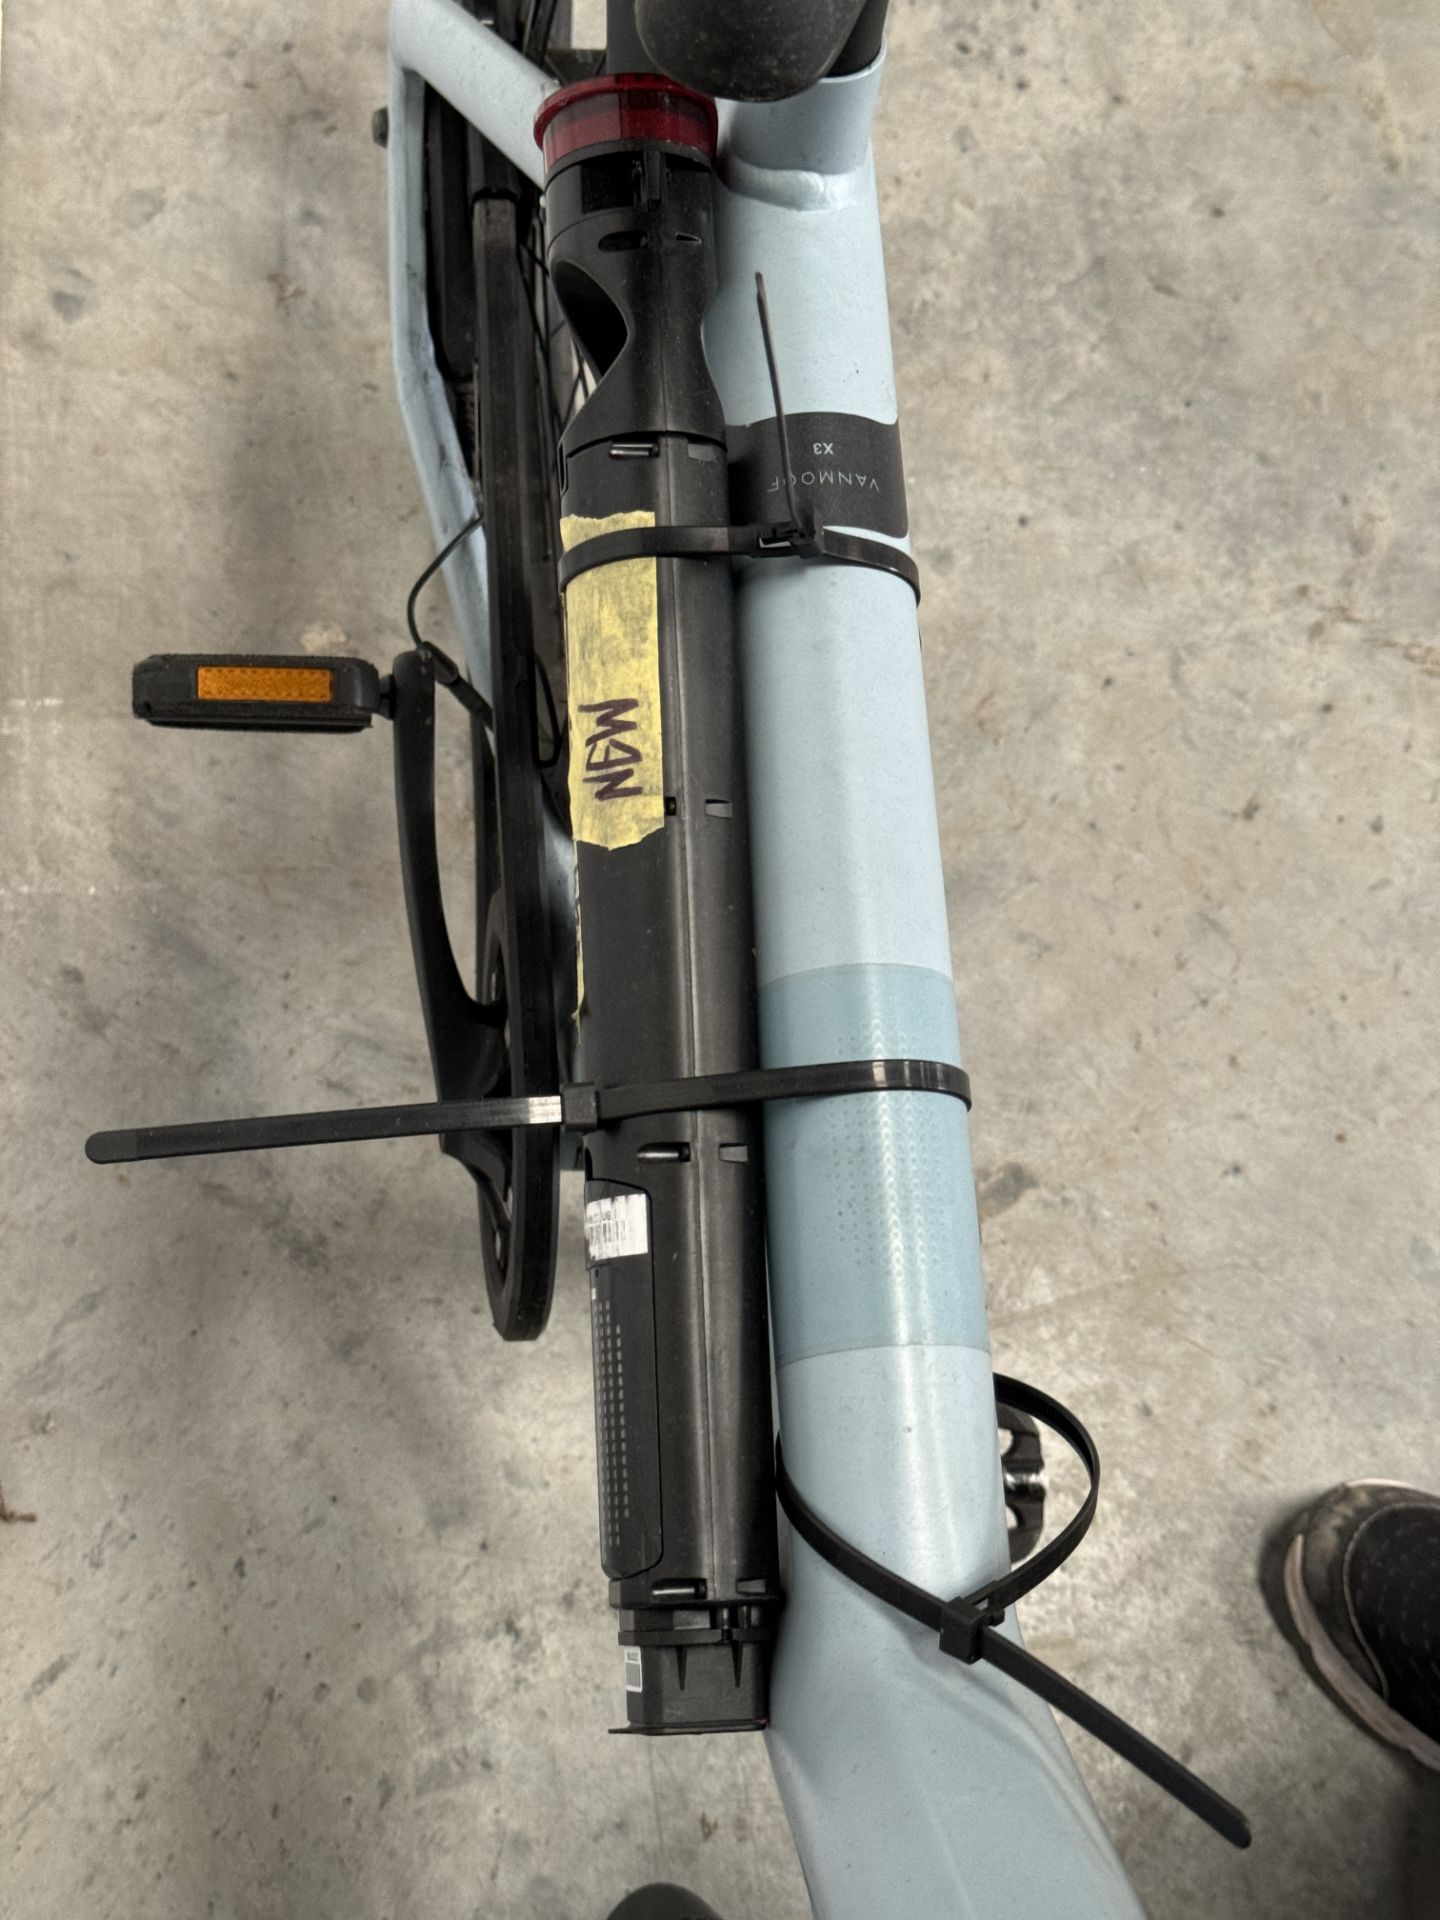 VanMoof X3 Electric Bike, Frame Number ASY4113420 (NOT ROADWORTHY - FOR SPARES ONLY) (No codes - Image 3 of 3